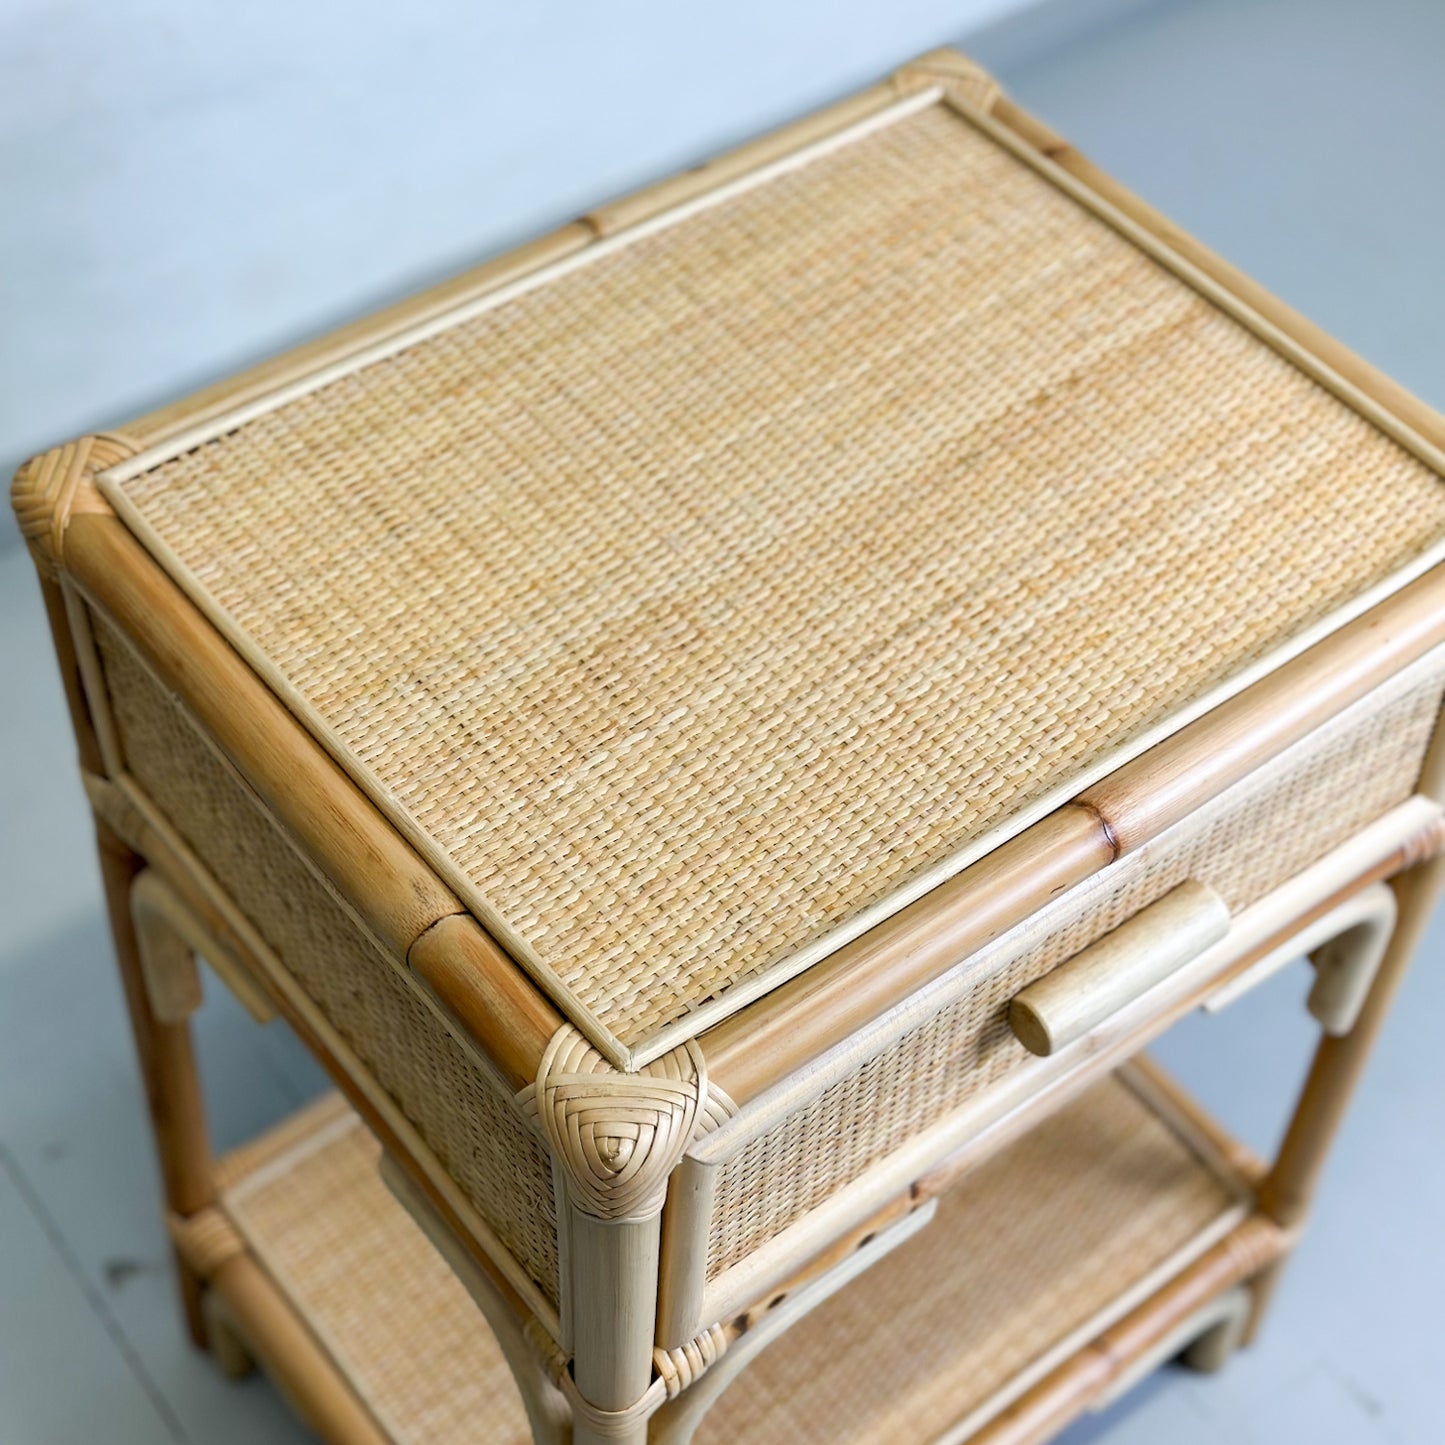 Cane & Rattan Bedside Table with Drawer